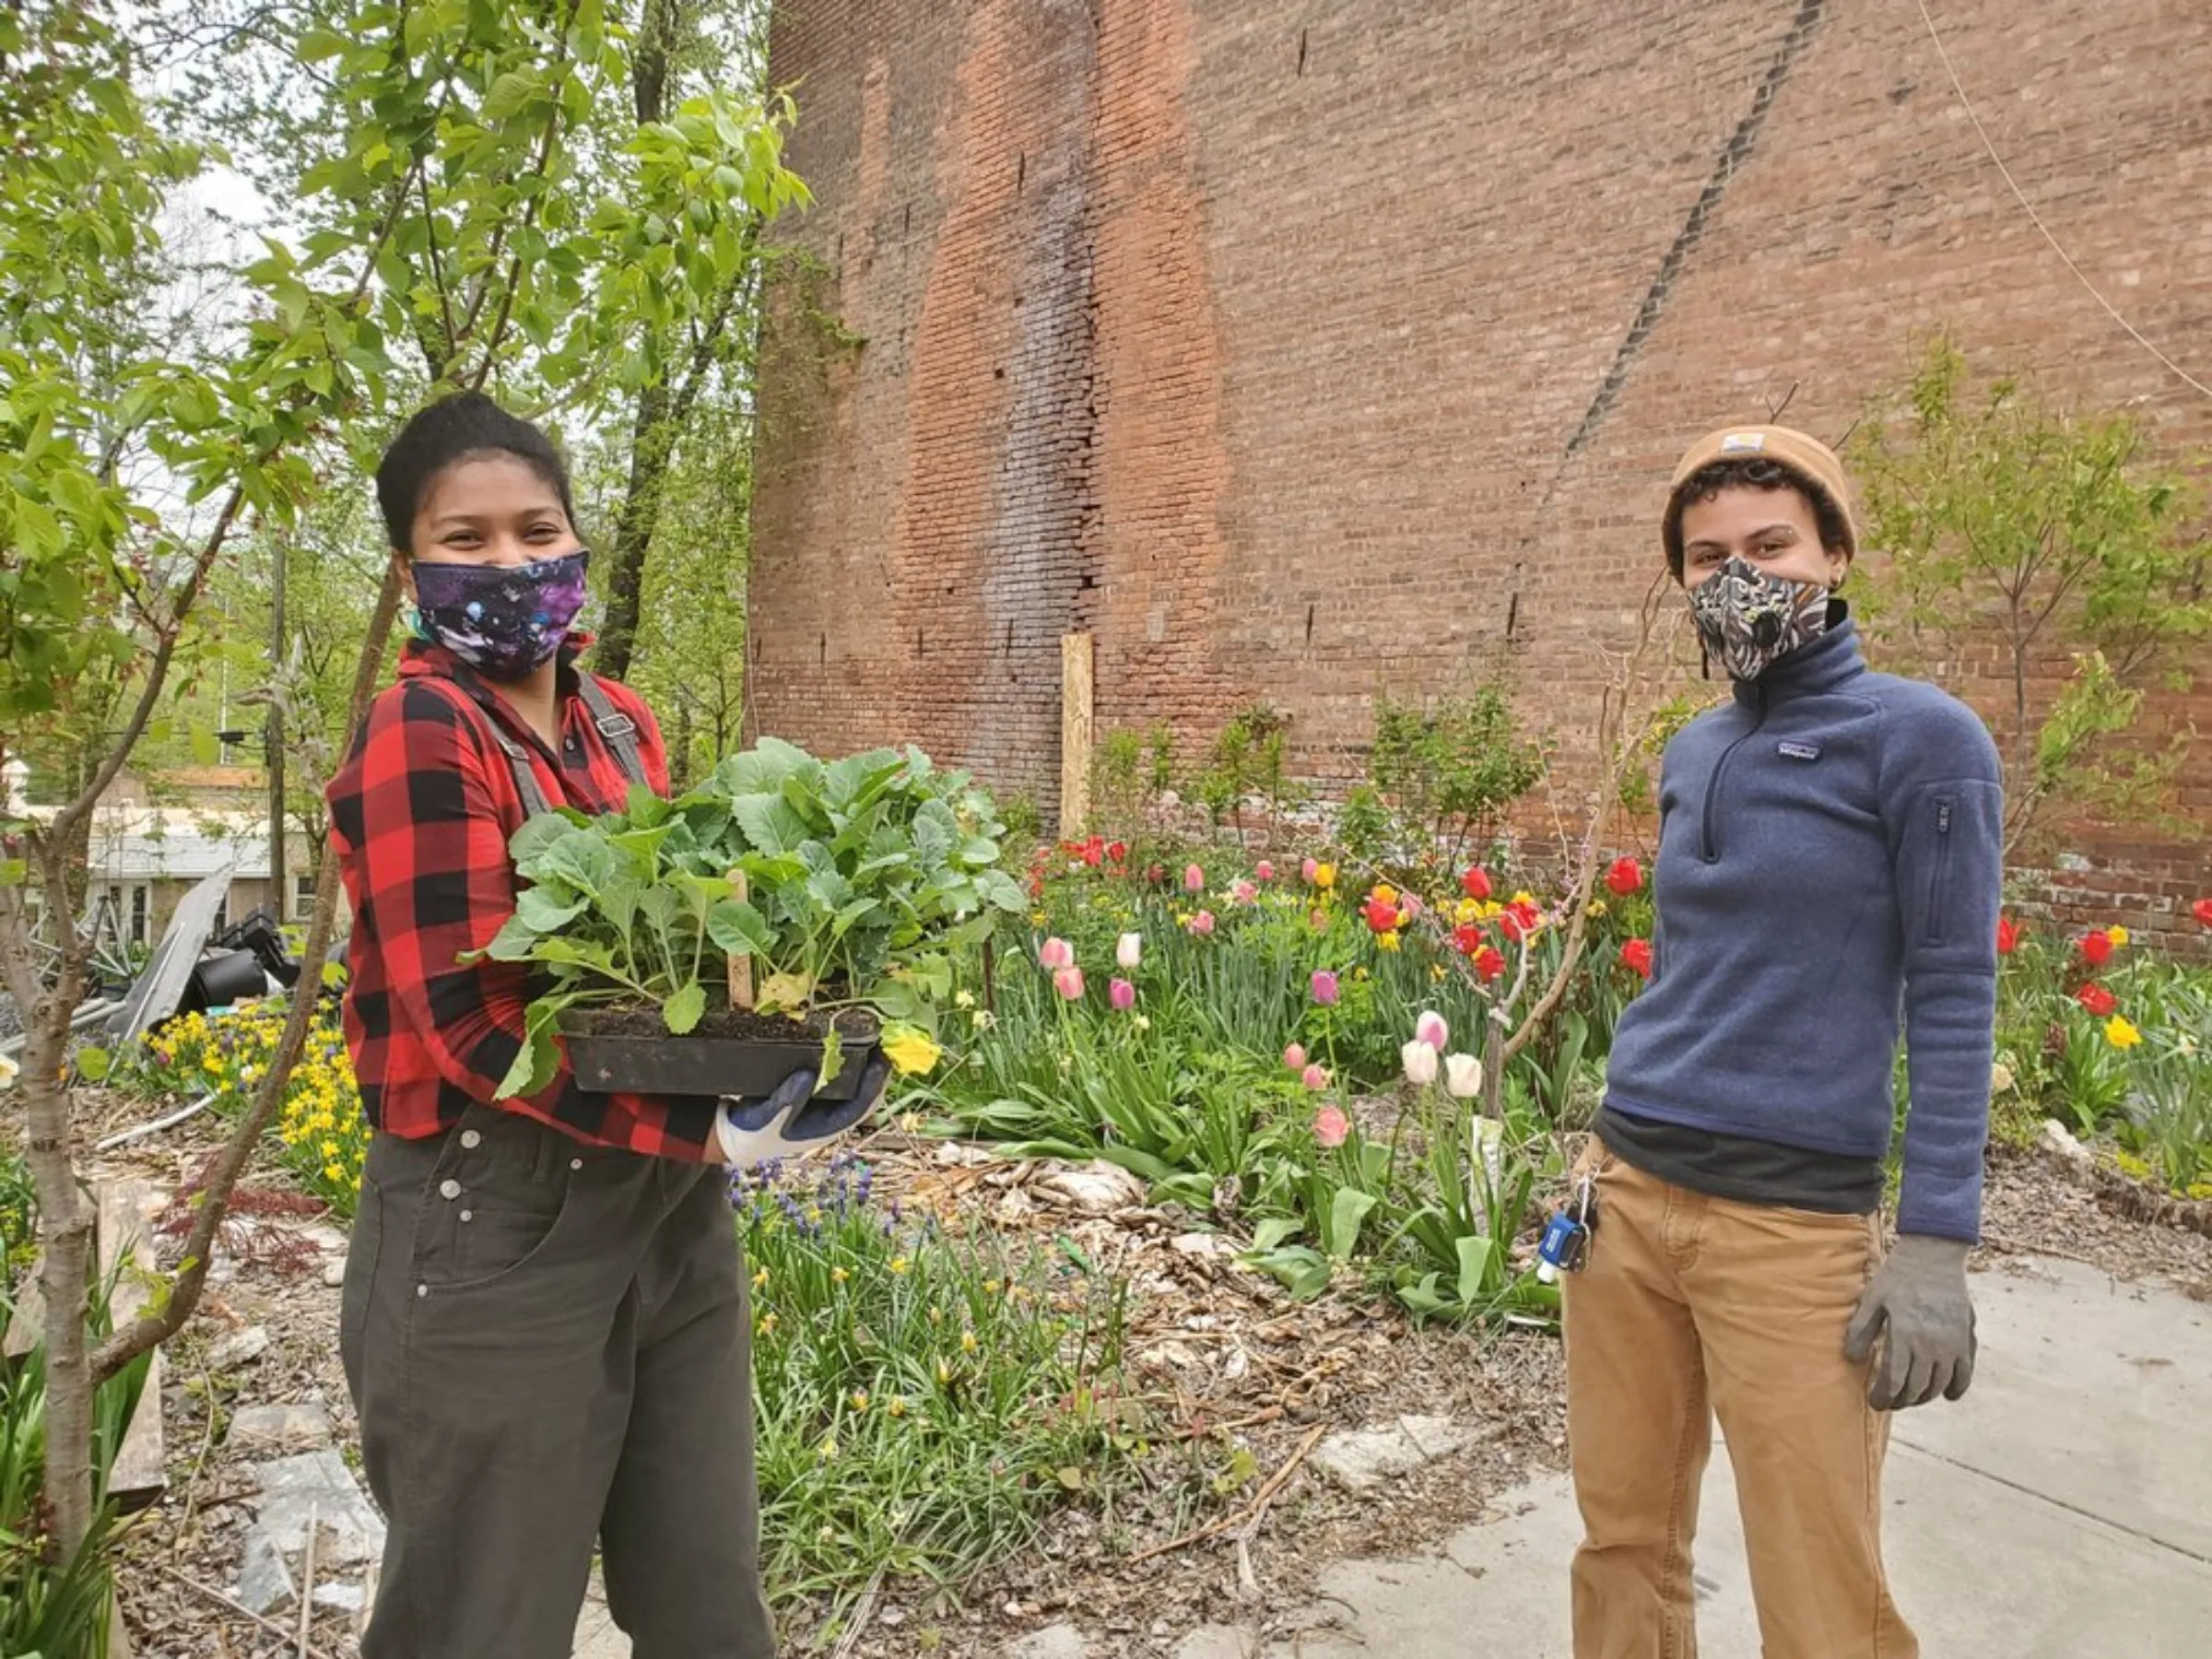 Soul Fire Farm employee Kiani Conley-Wilson and a volunteer poses for a photo while planting an urban garden in New York